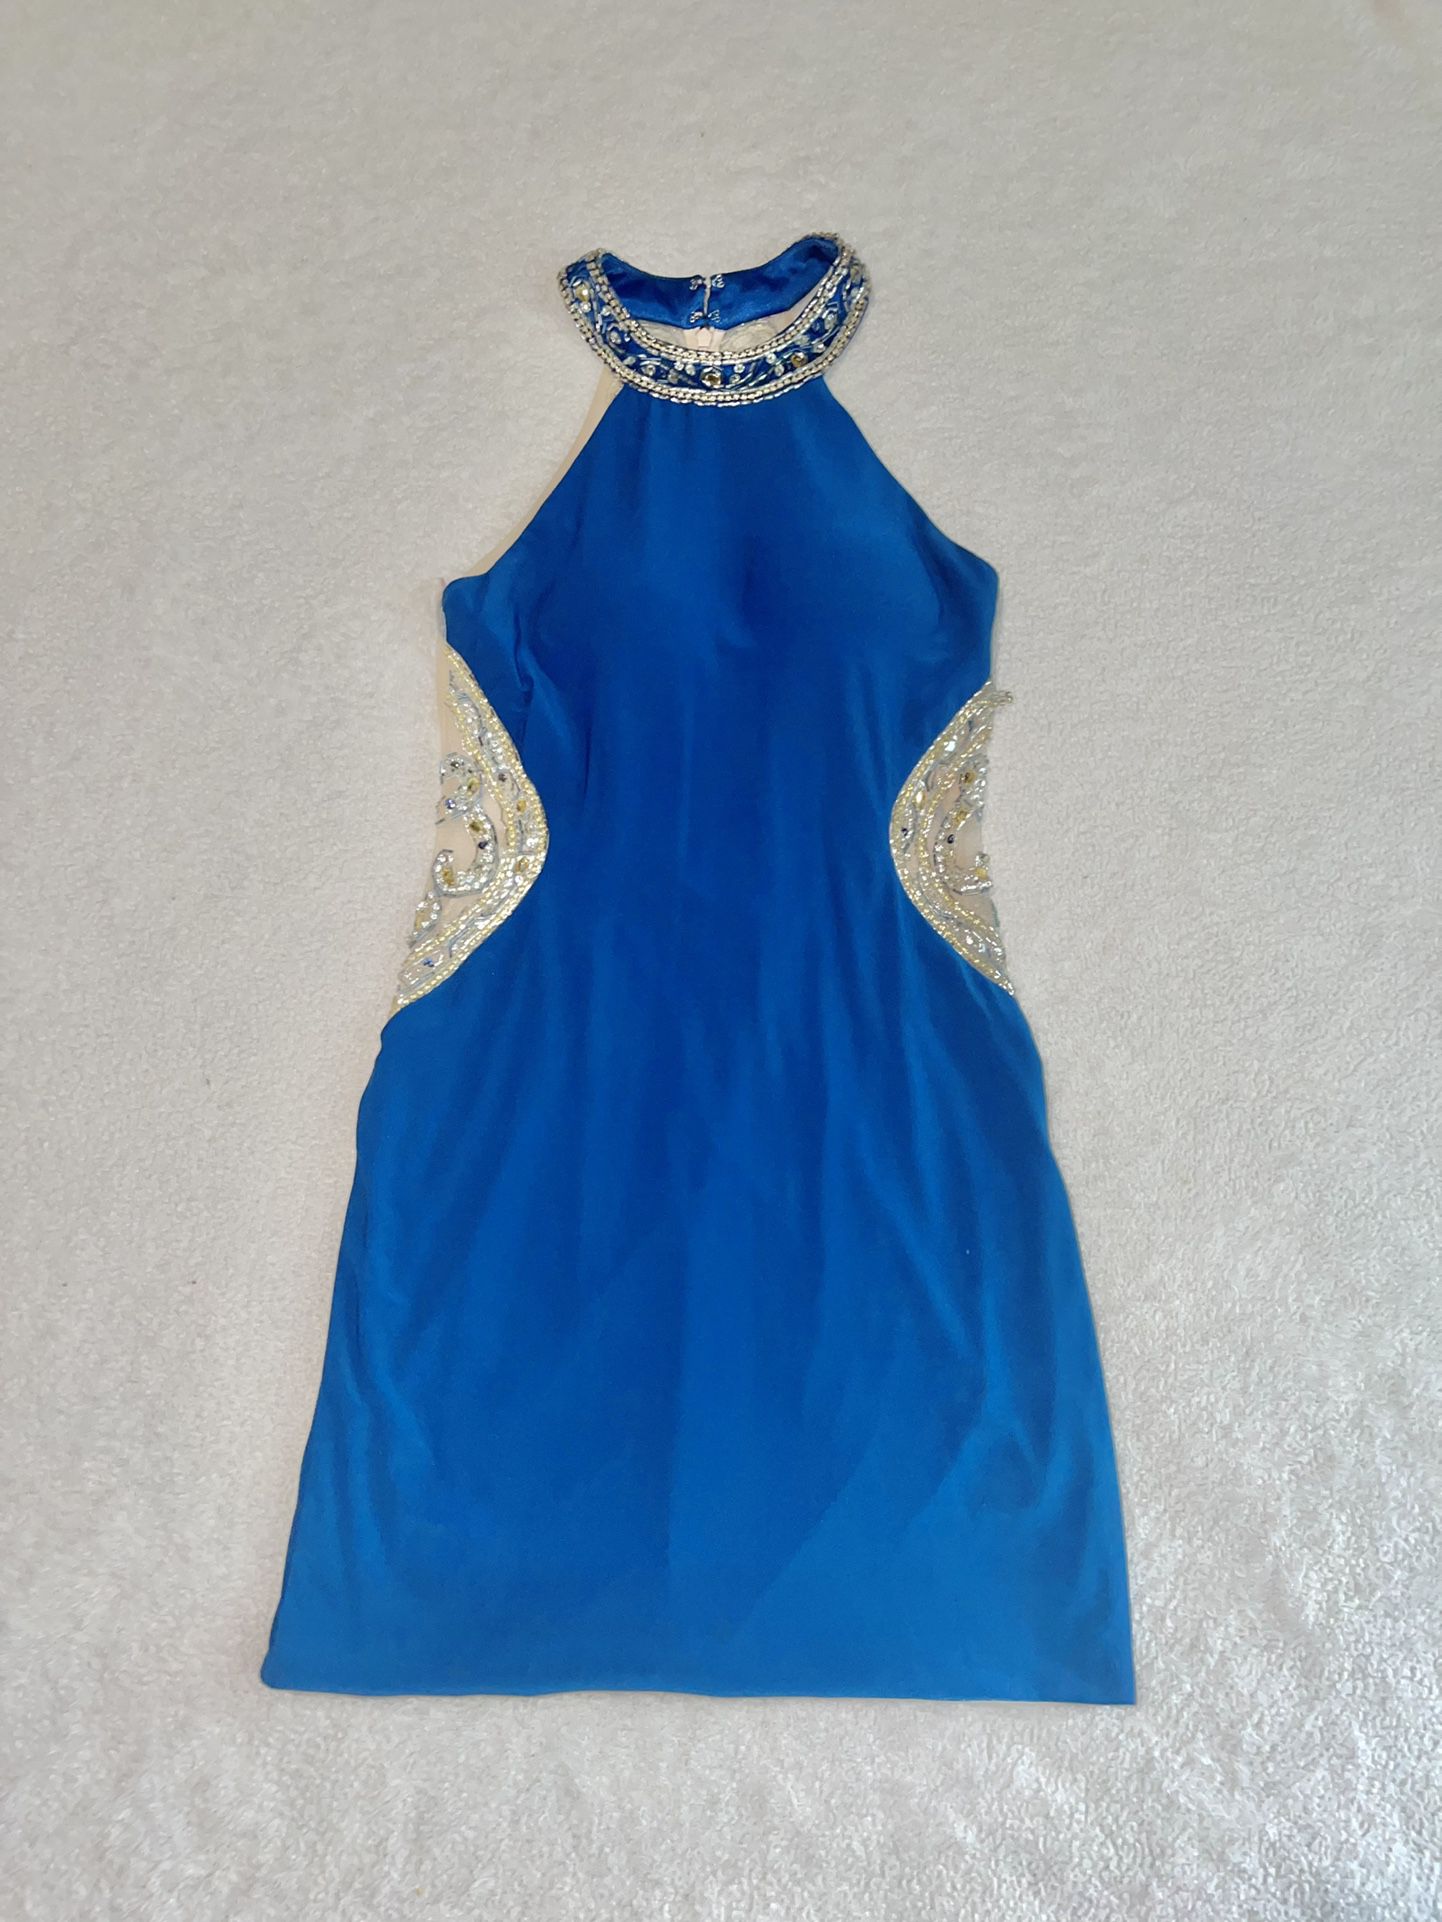 Blue Jeweled/Beaded Homecoming Dress by BLUSHPROM